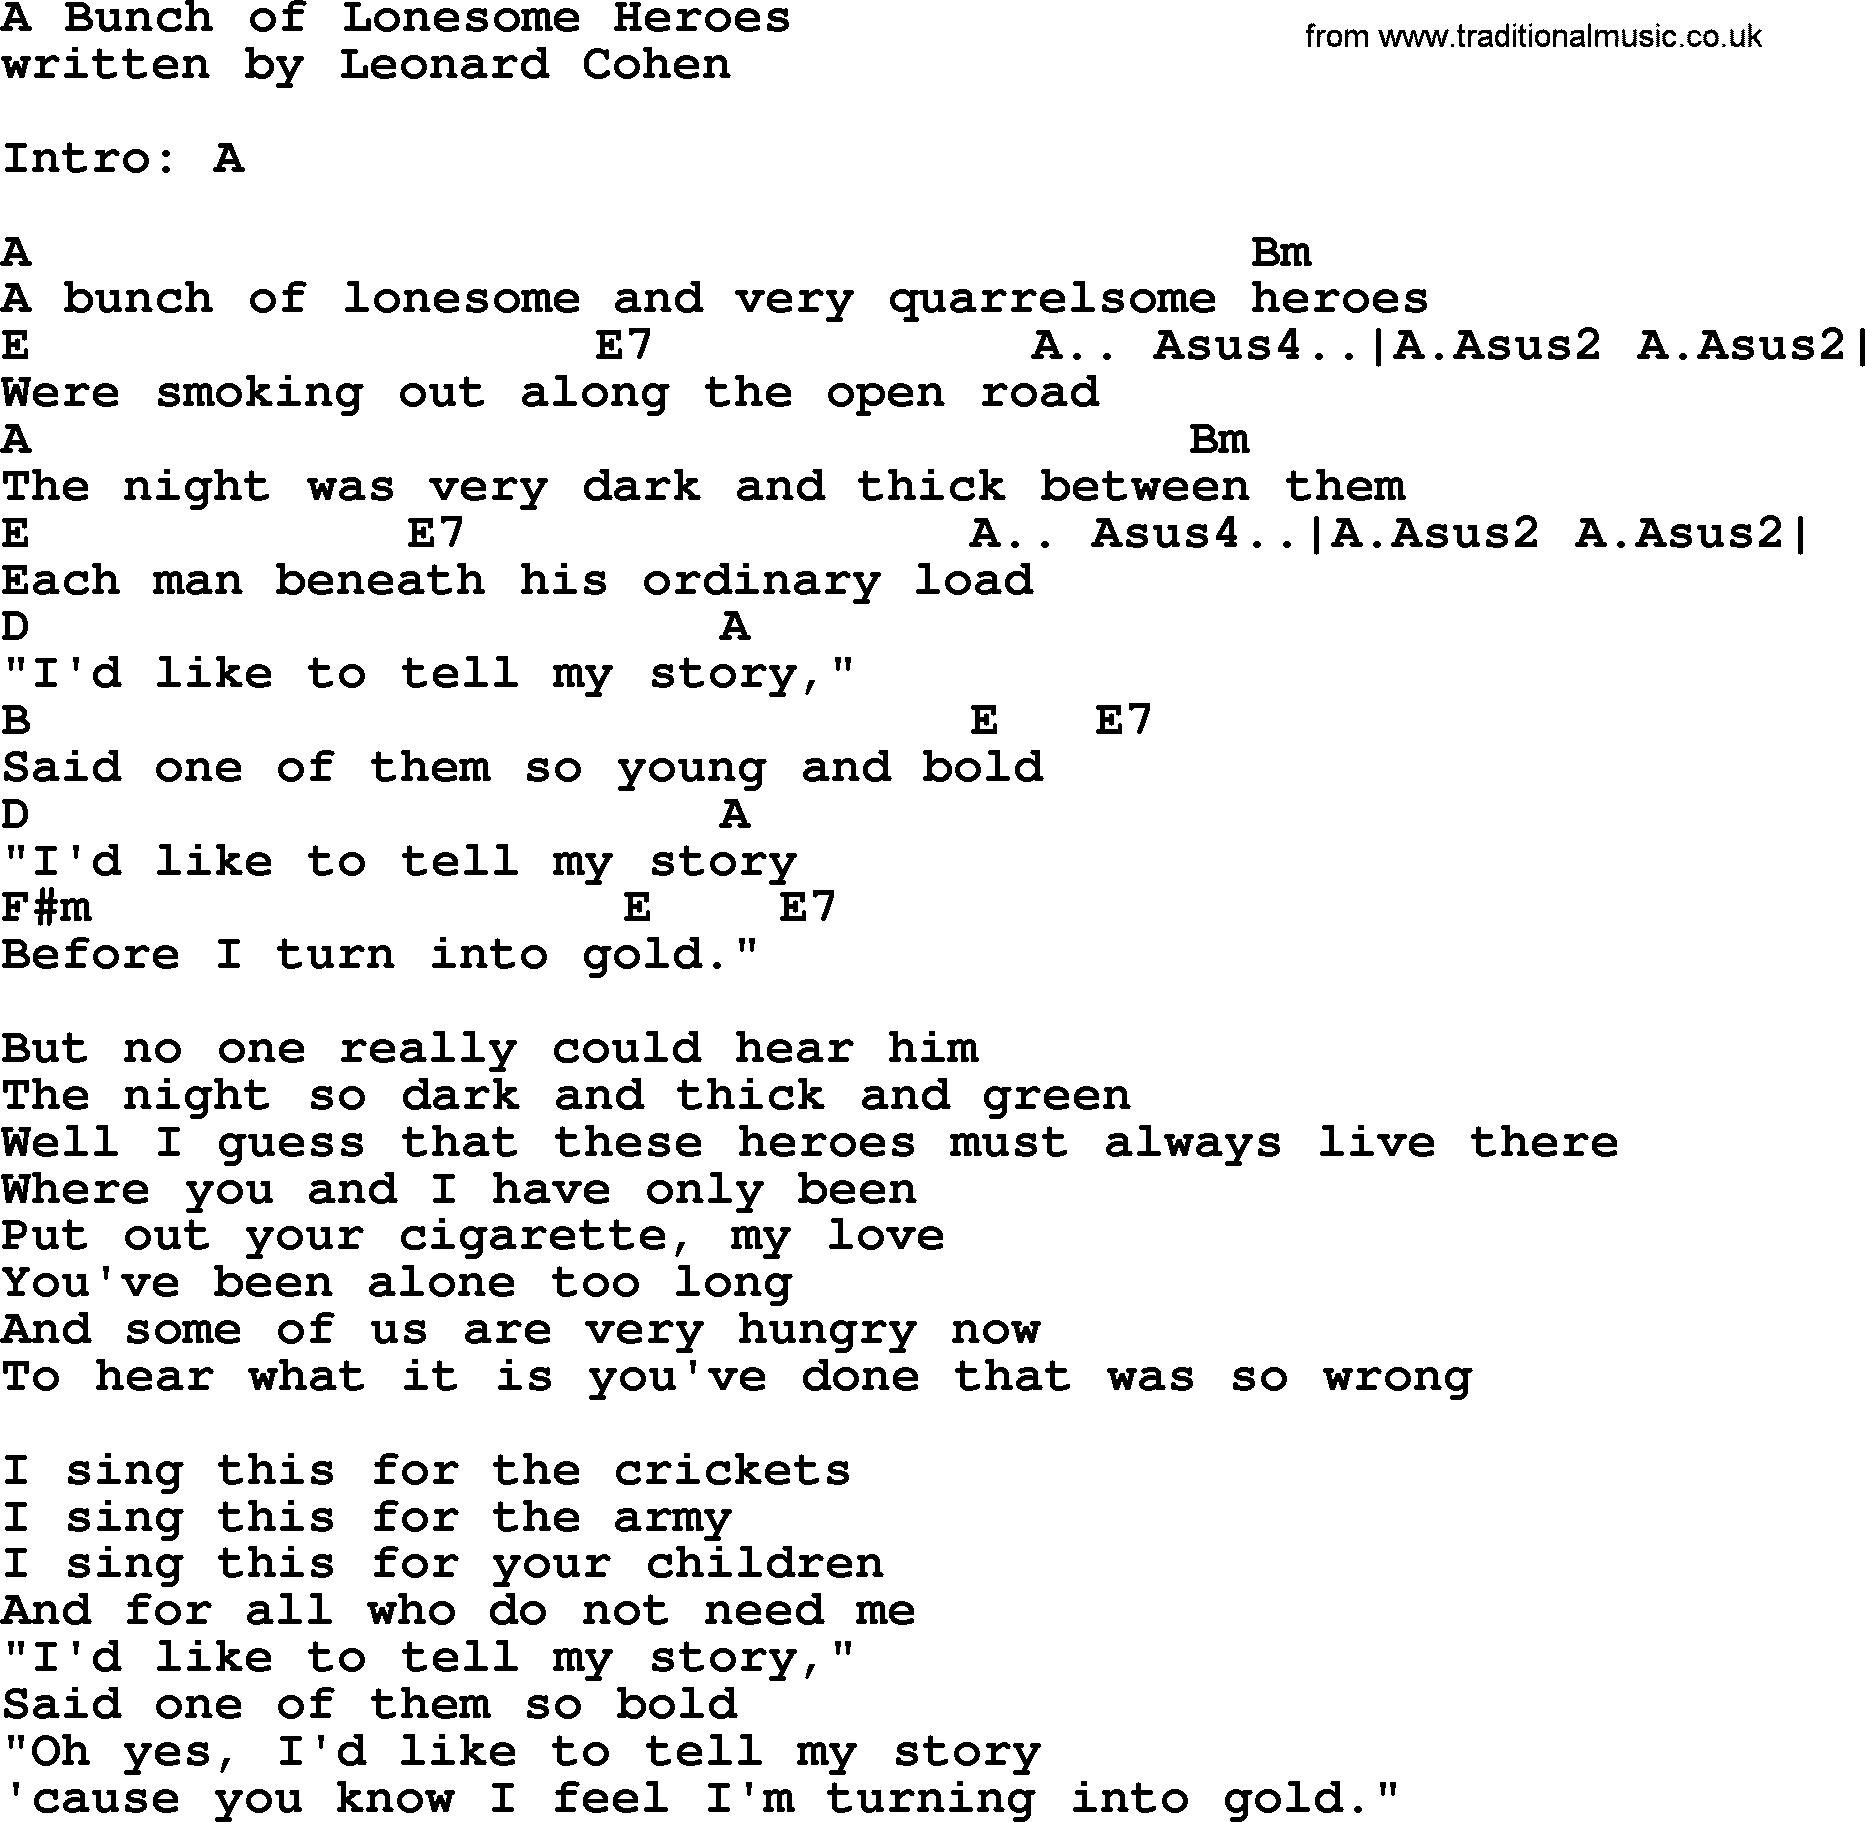 Leonard Cohen song A Bunch Of Lonesome Heroes, lyrics and chords